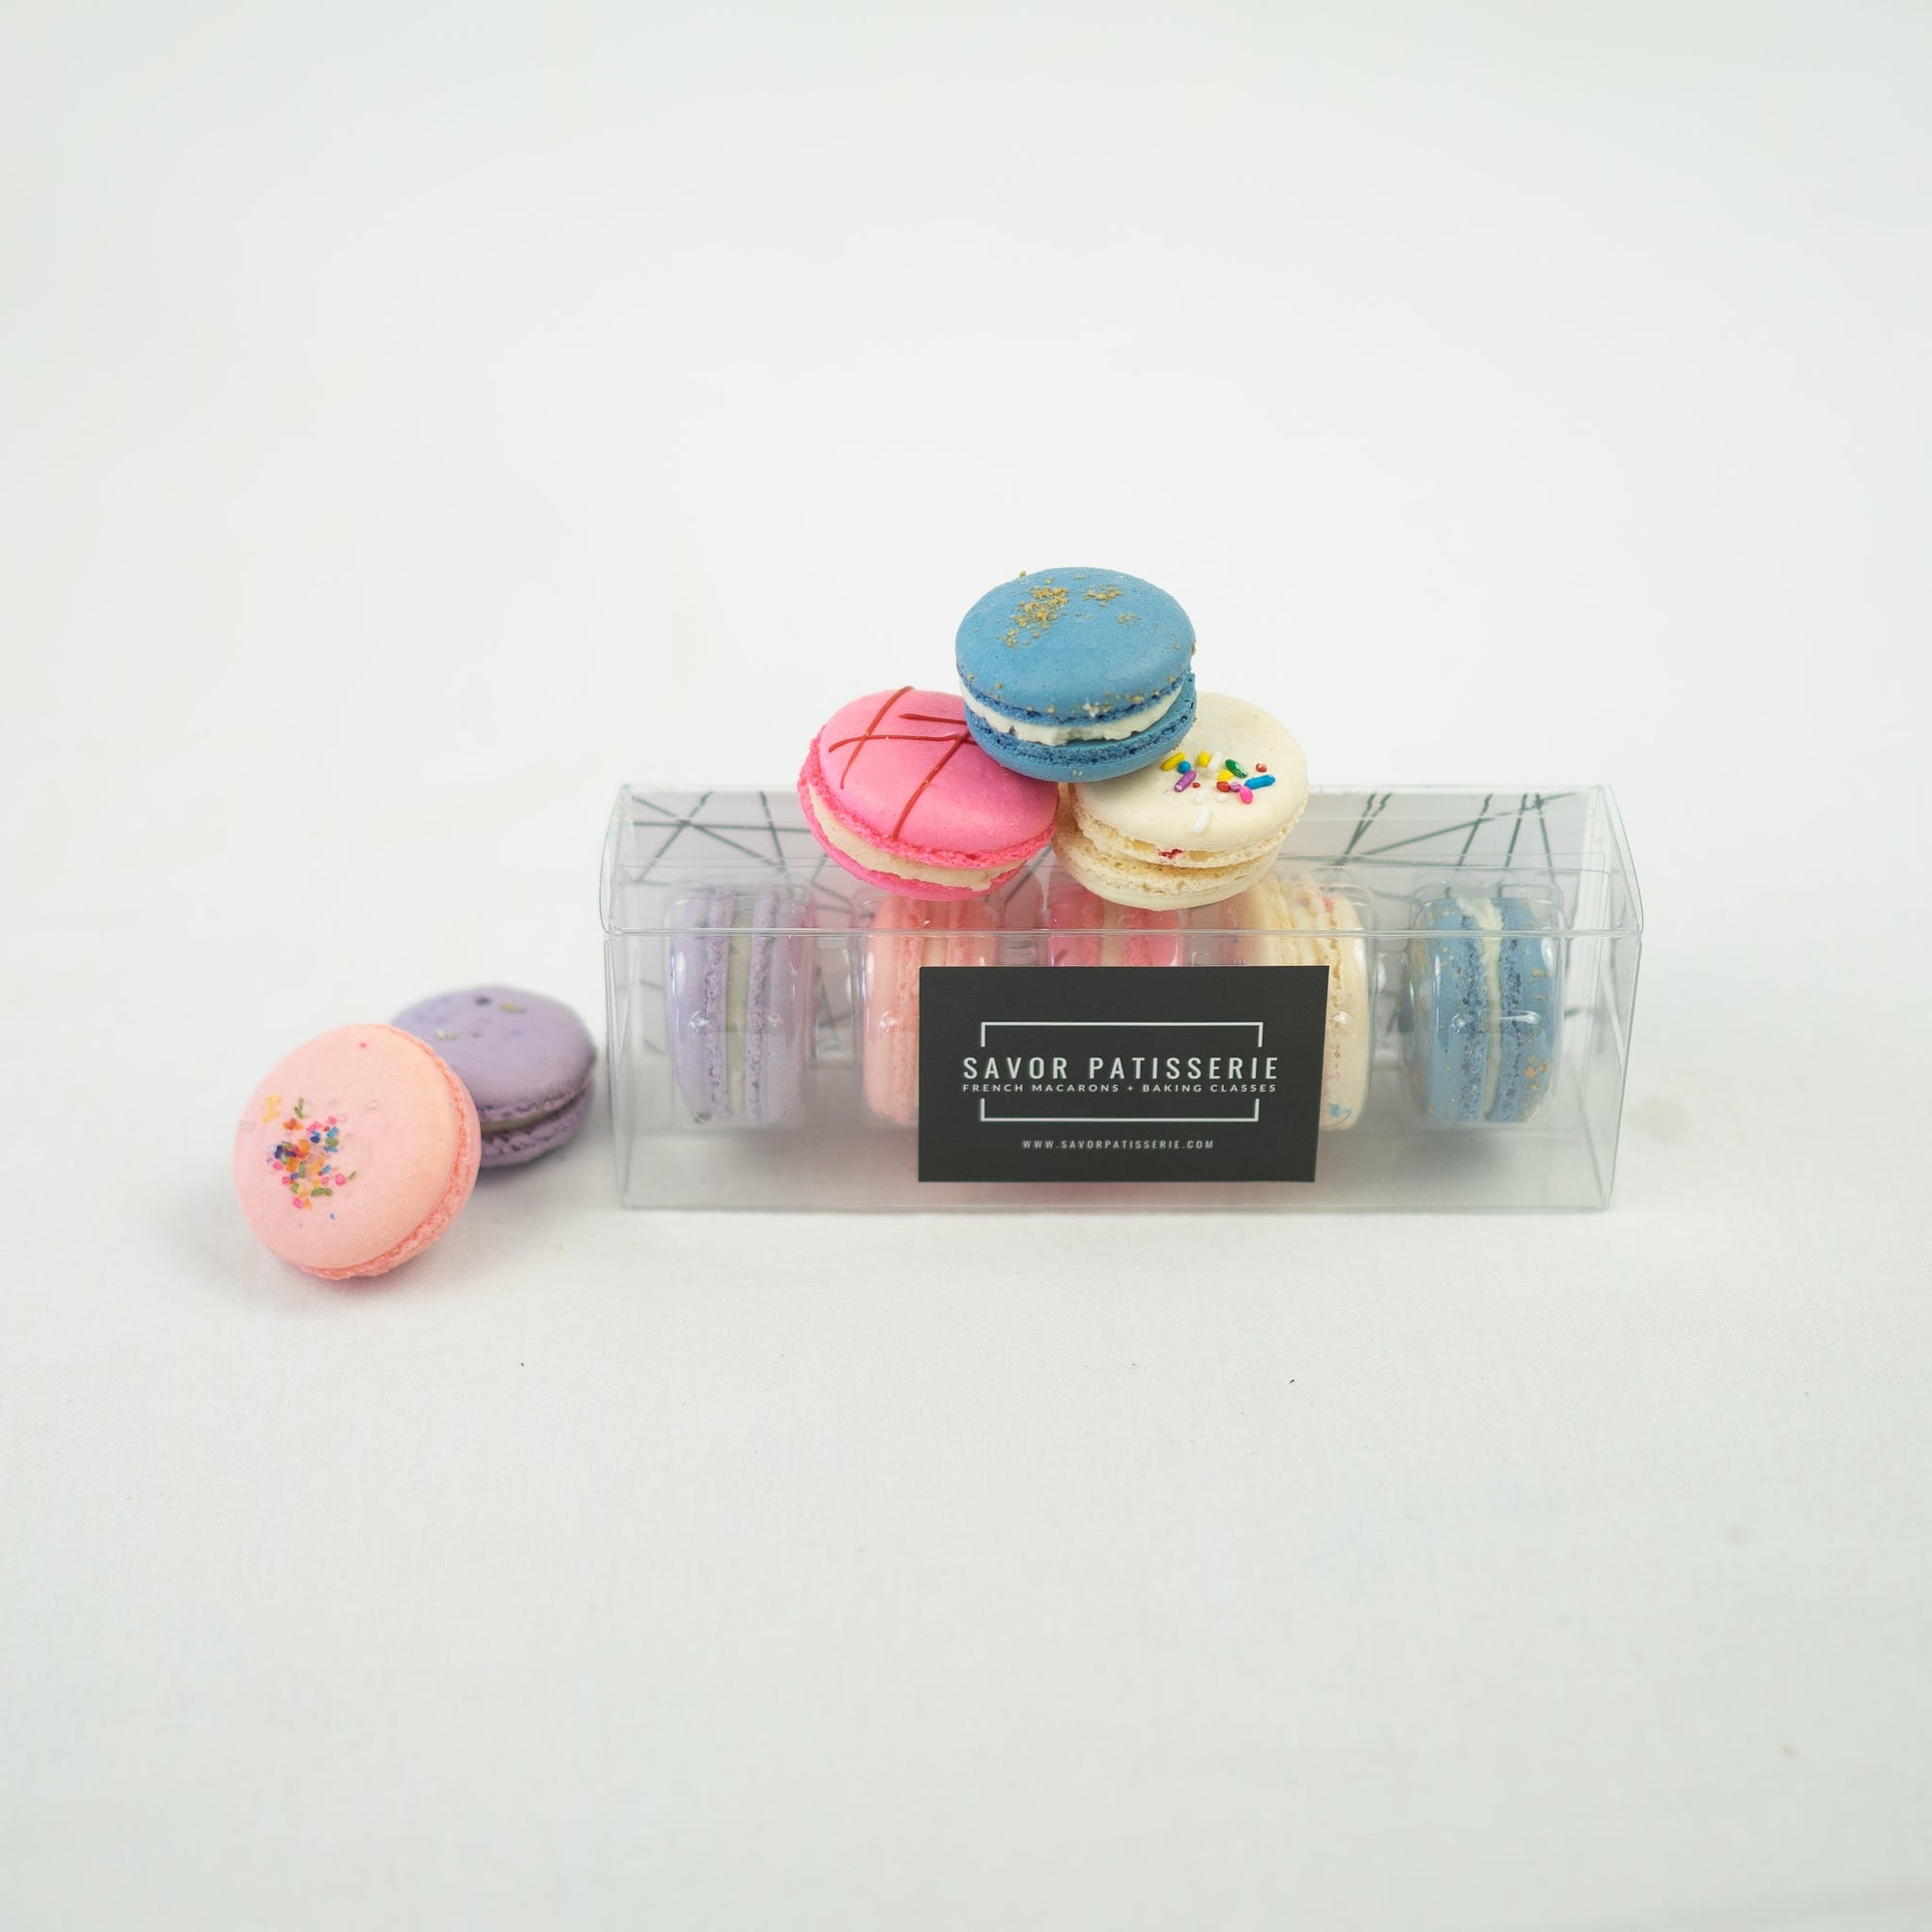 Savor Patisserie Macarons by Savor Patisserie French Macarons